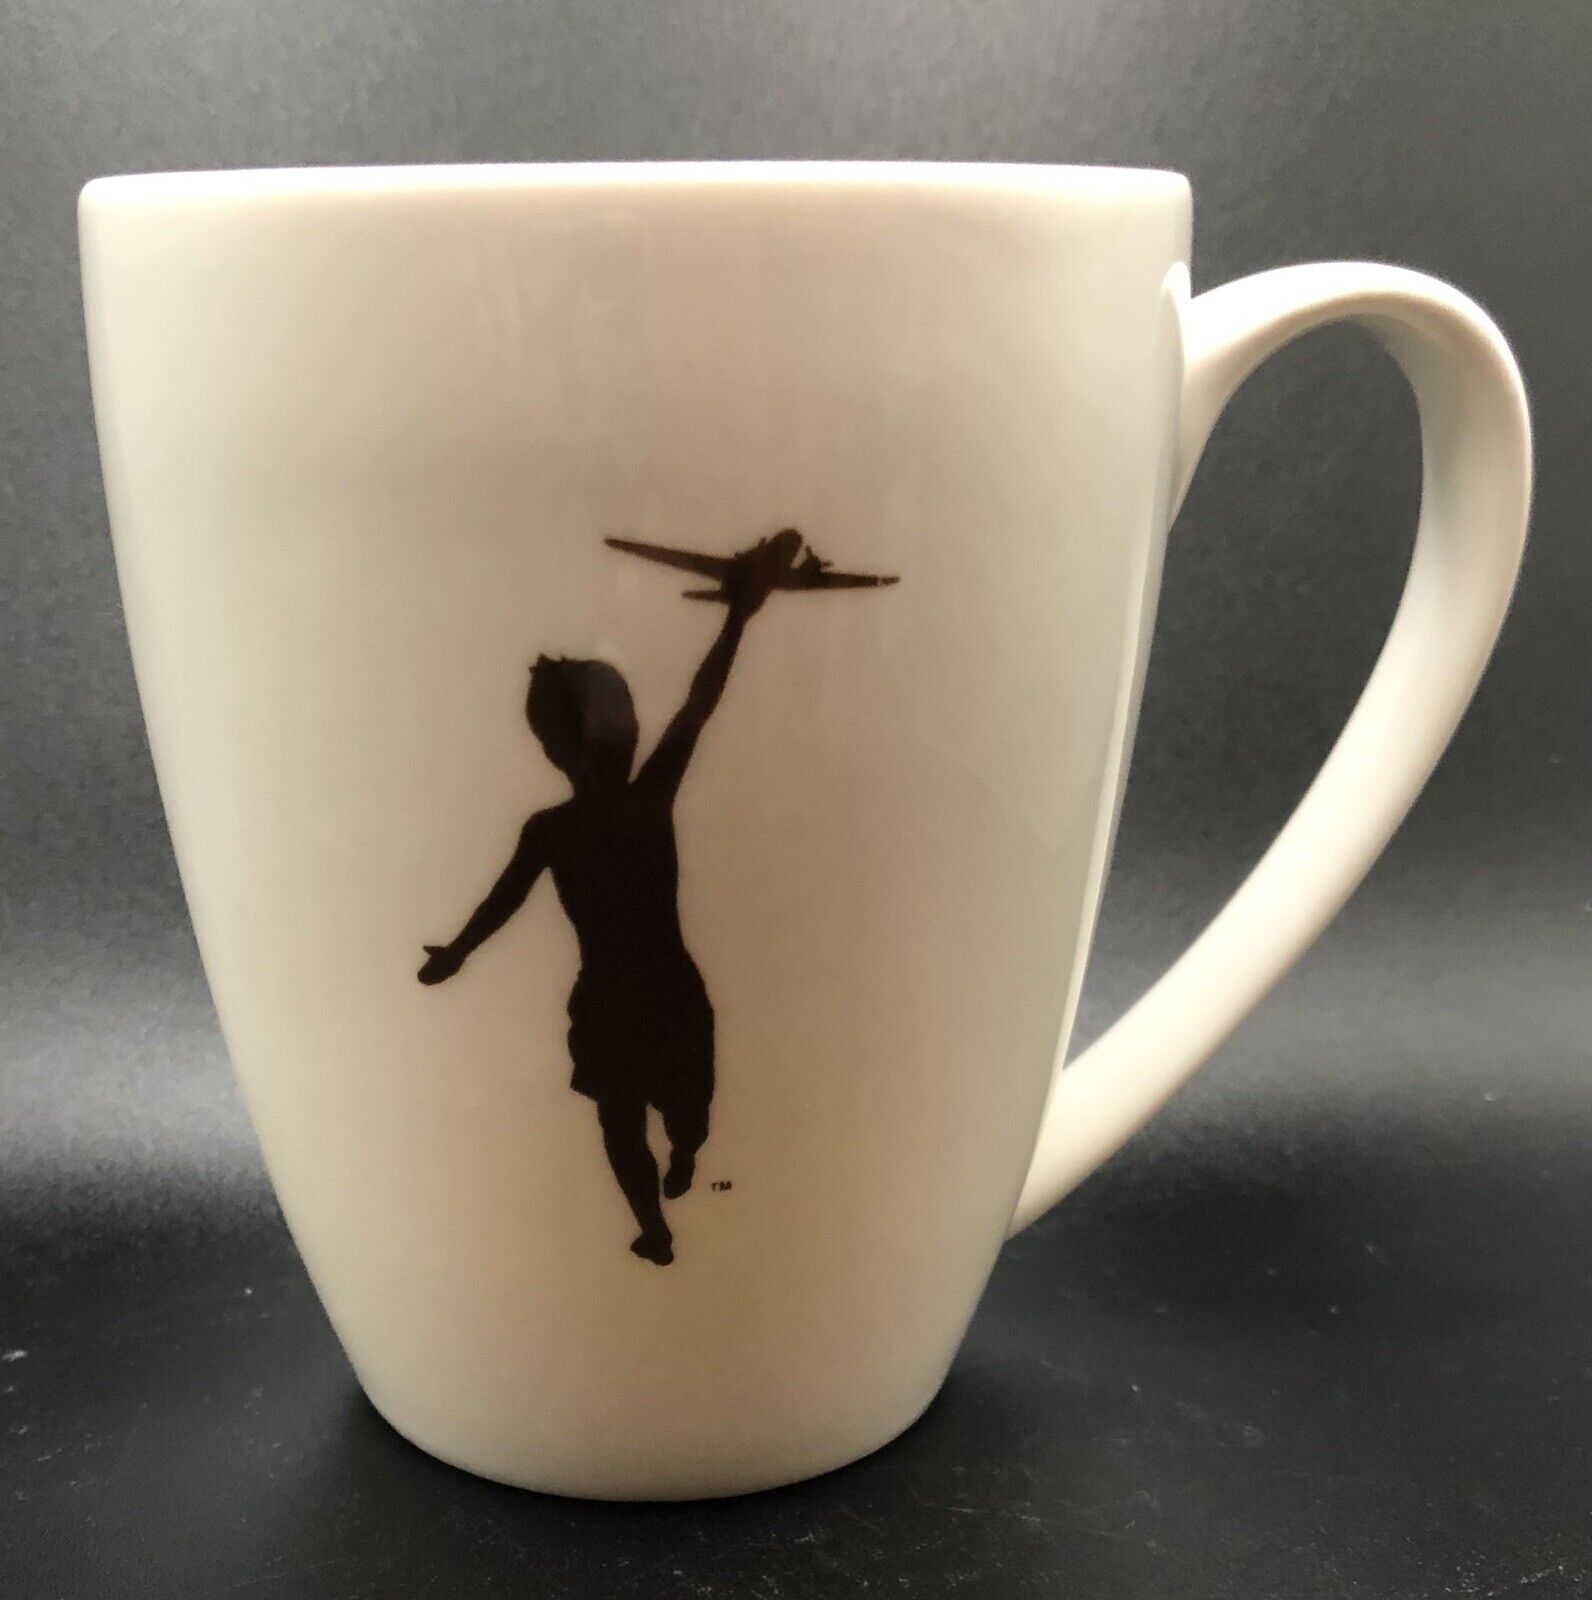 White Storyville Coffee Company Mug “YOUNG BOY RUNNING w/ TOY PLANE” Silhouette 